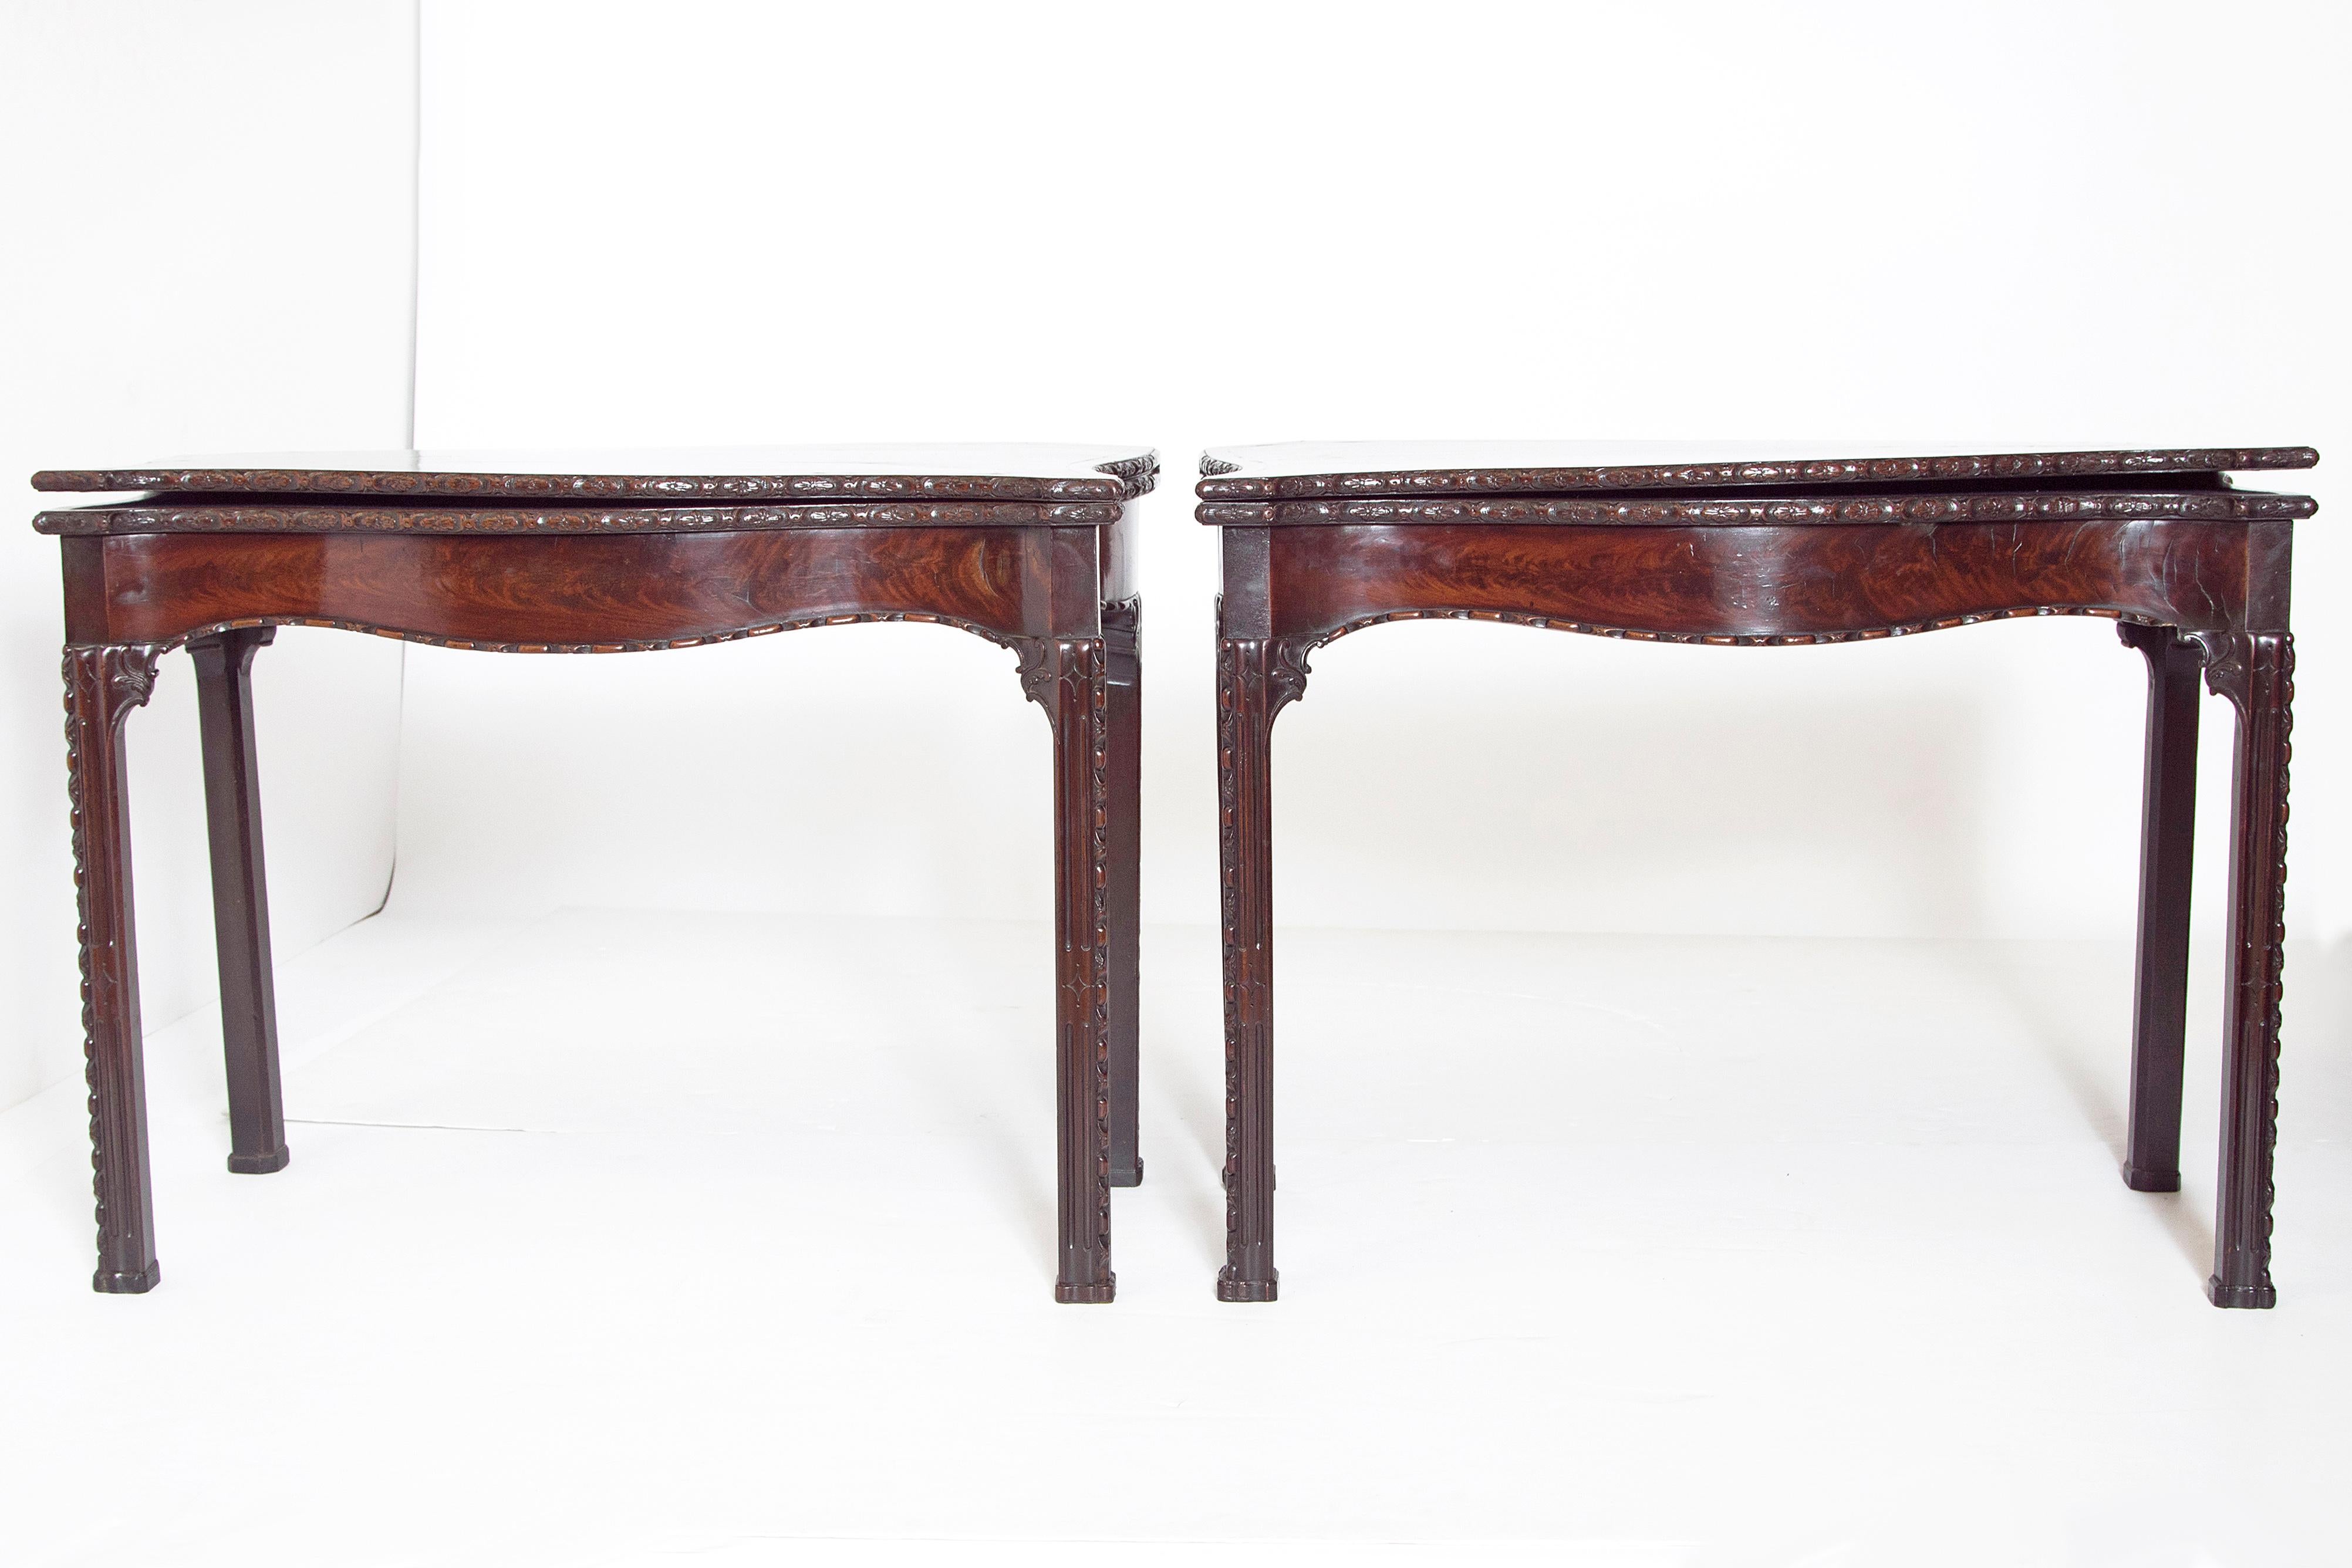 A pair of early George III flip topcard tables with blue baize lining. The tables feature a unique serpentine front and sides. The top edge has a carved floral decoration with well figured mahogany and an inlay border. A carved decoration continues